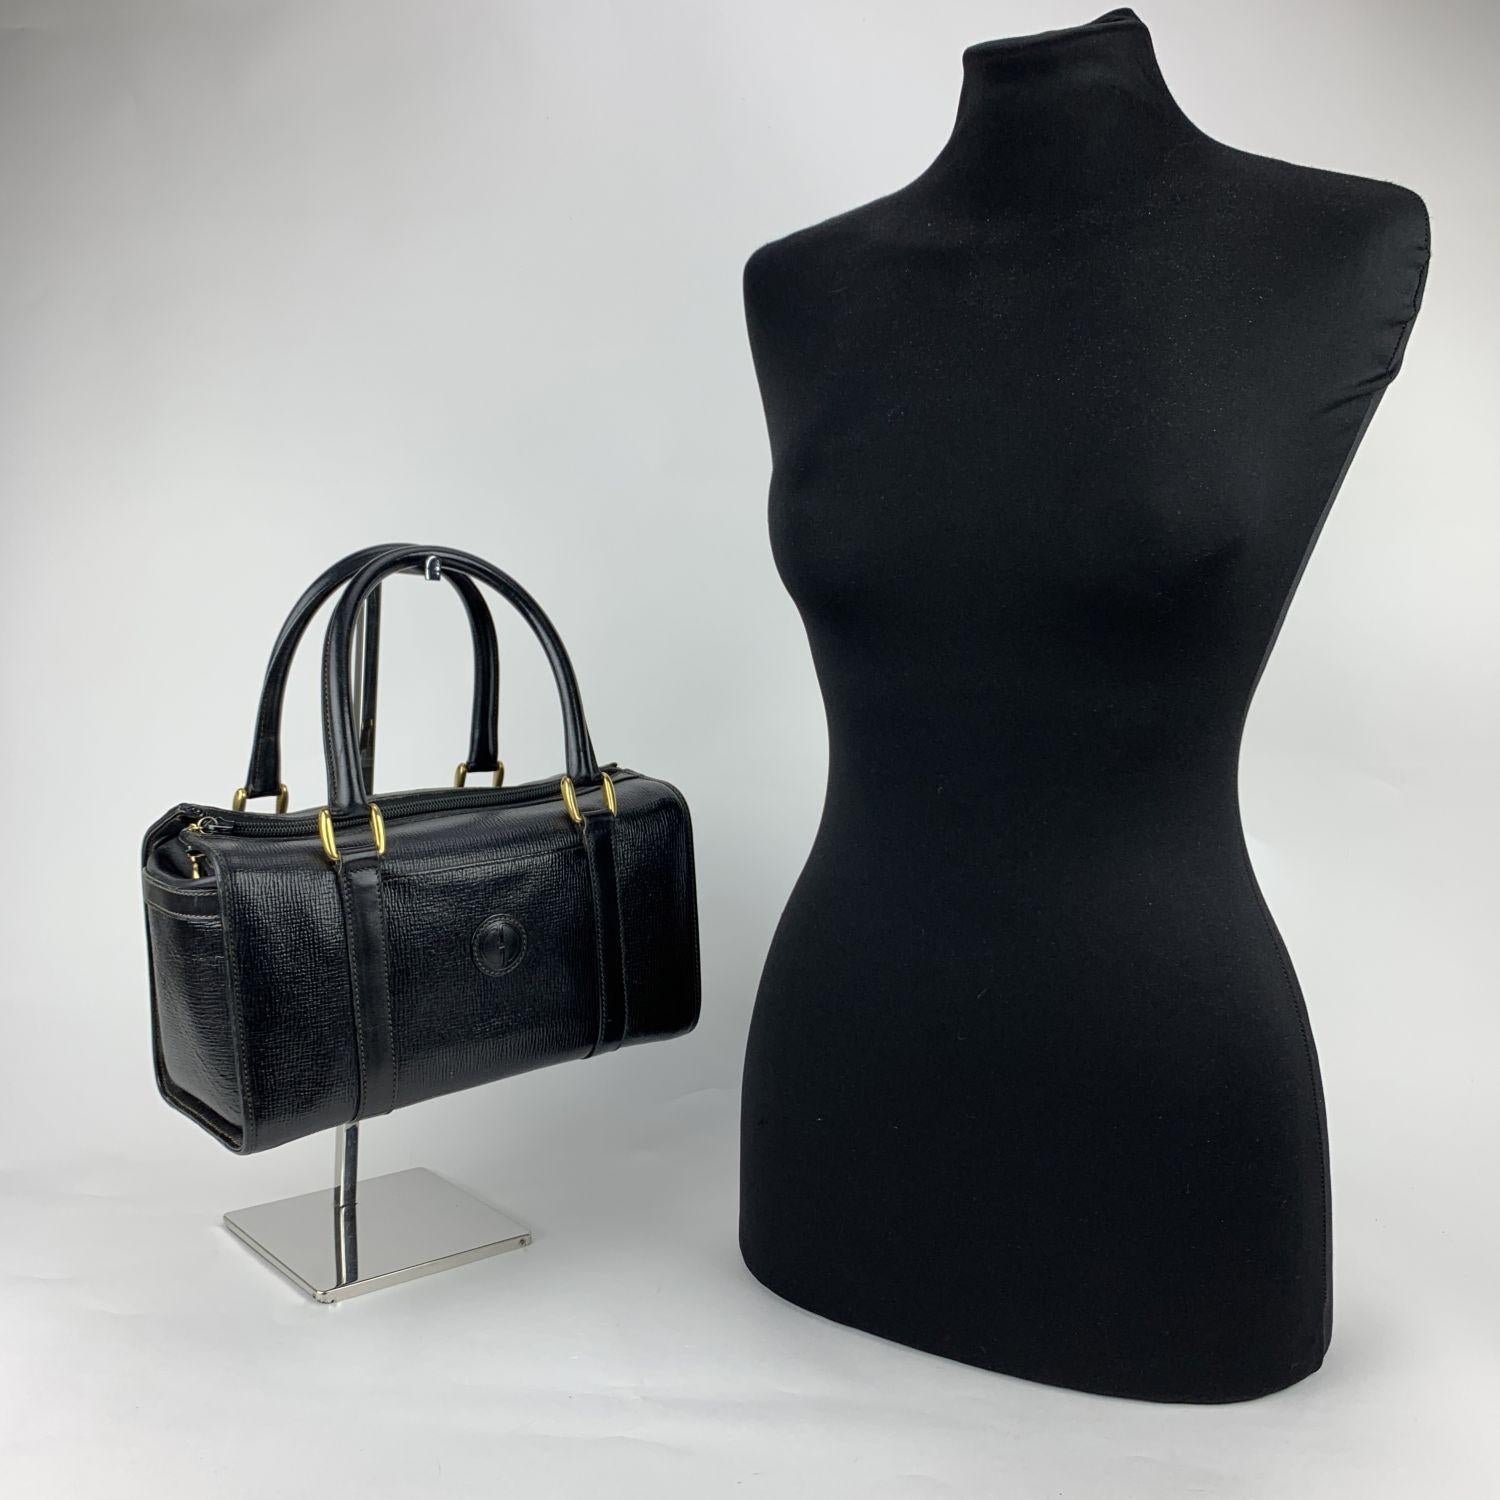 Vintage GUCCI black leather top handles bauletto bag Rolled black leather top handles. Upper zipper closure. Black suede interior. 1 side open pocket inside. 'GUCCI - Made in Italy' tag inside (with serial number on its reverse)

Details

MATERIAL: